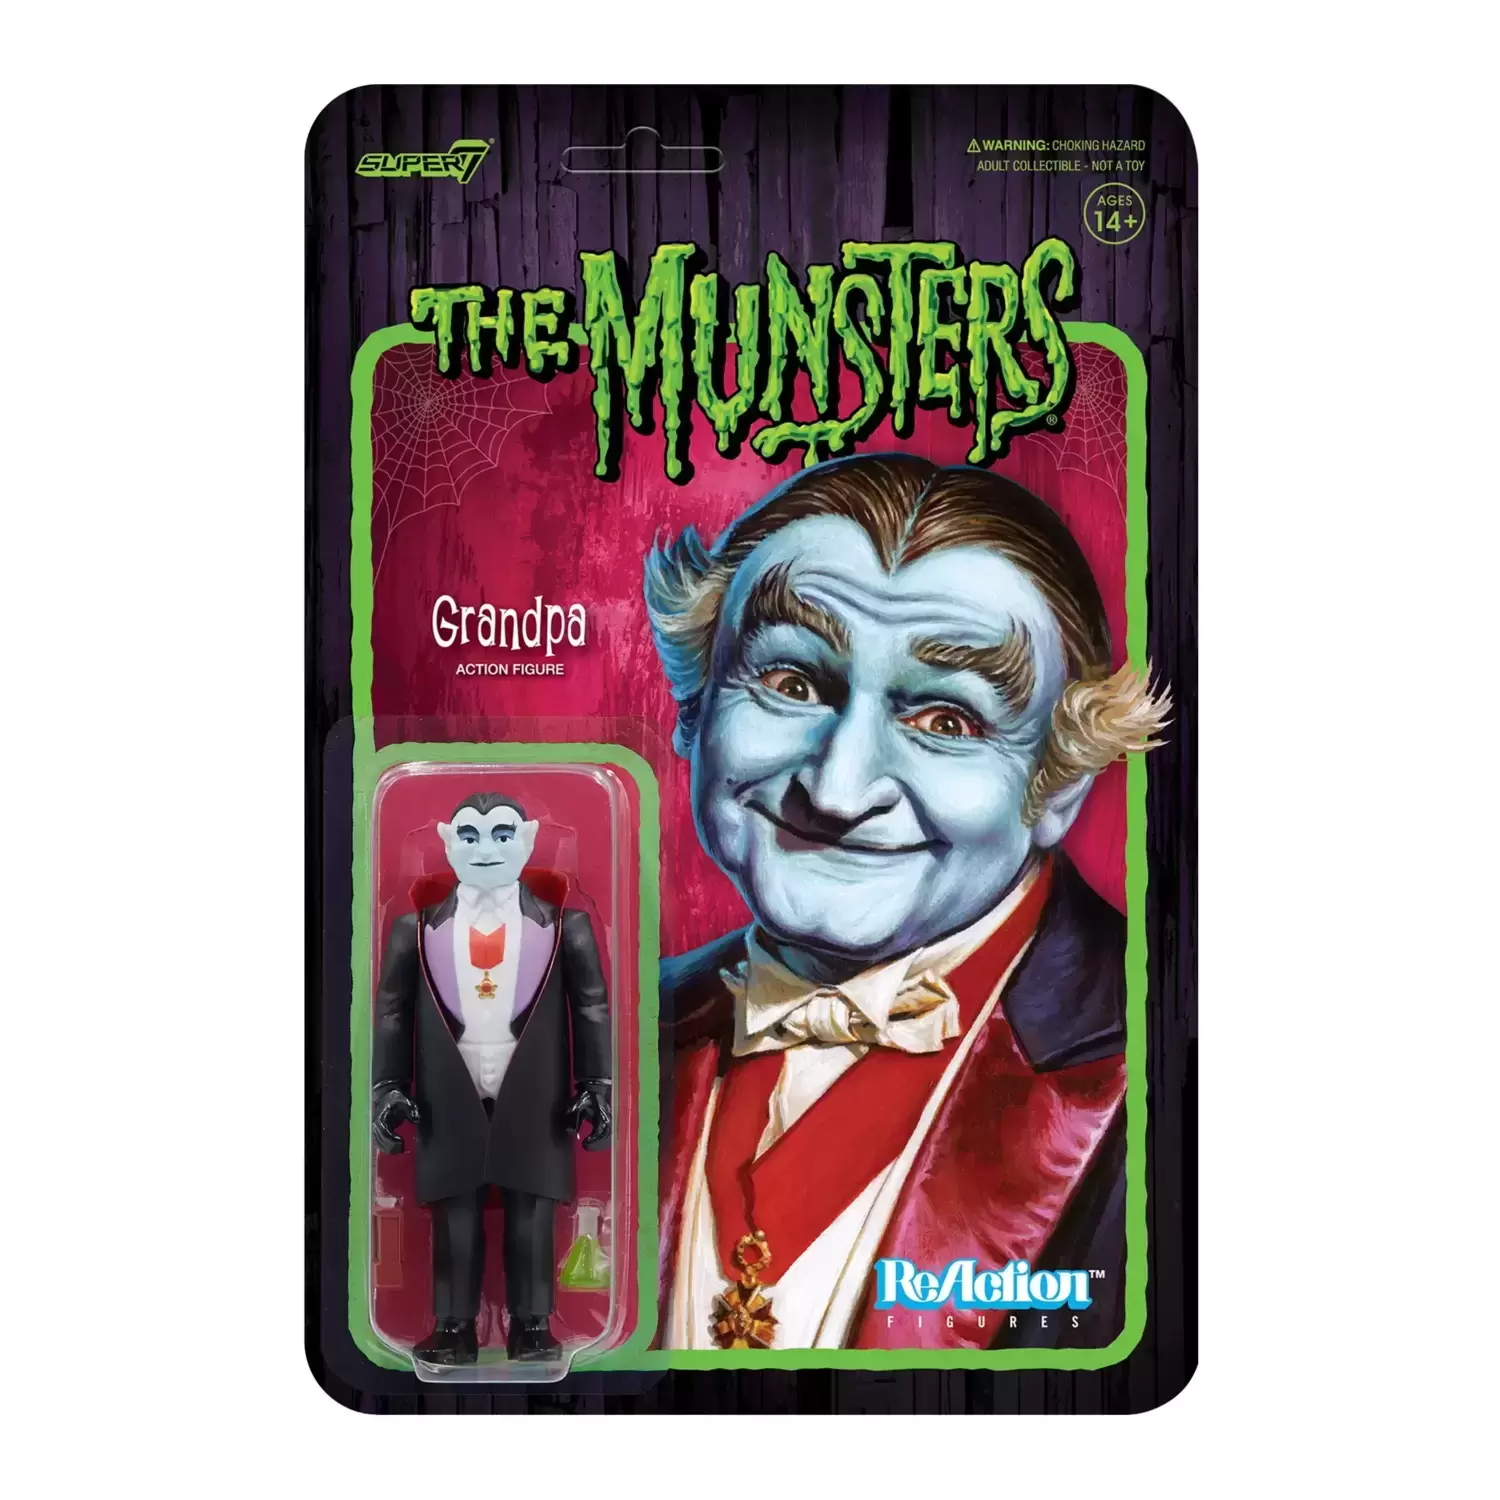 ReAction Figures - The munsters - Grandpa